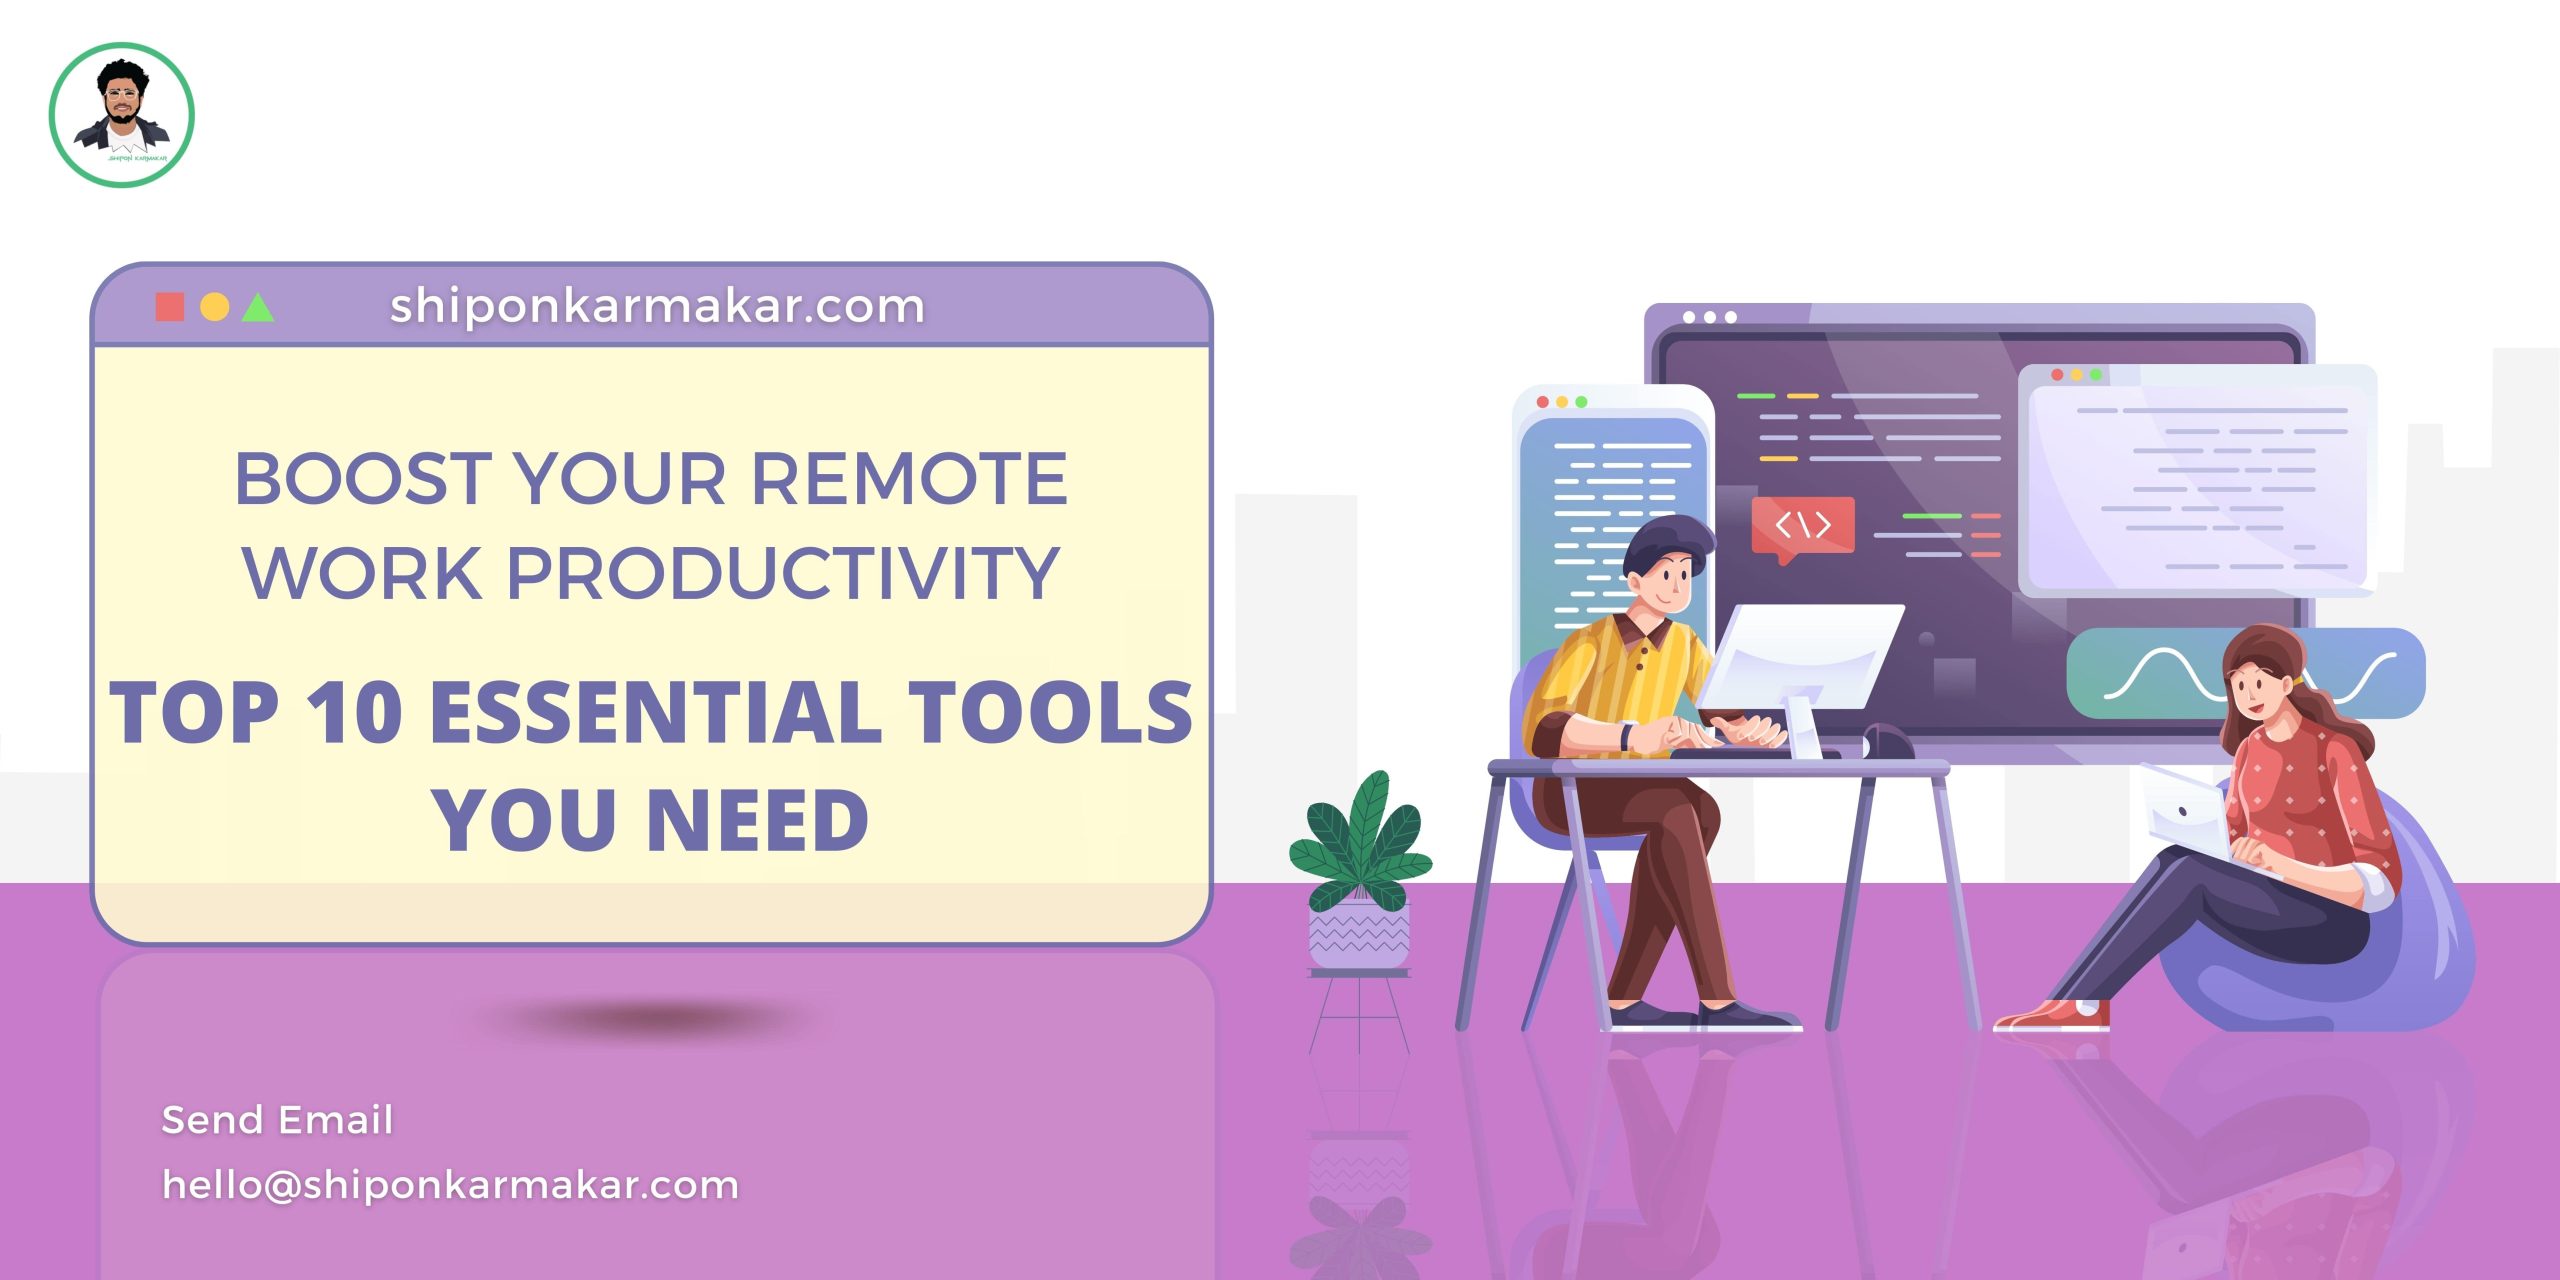 Top 16 Remote Job Tools for Productivity, Collaboration, and Communication